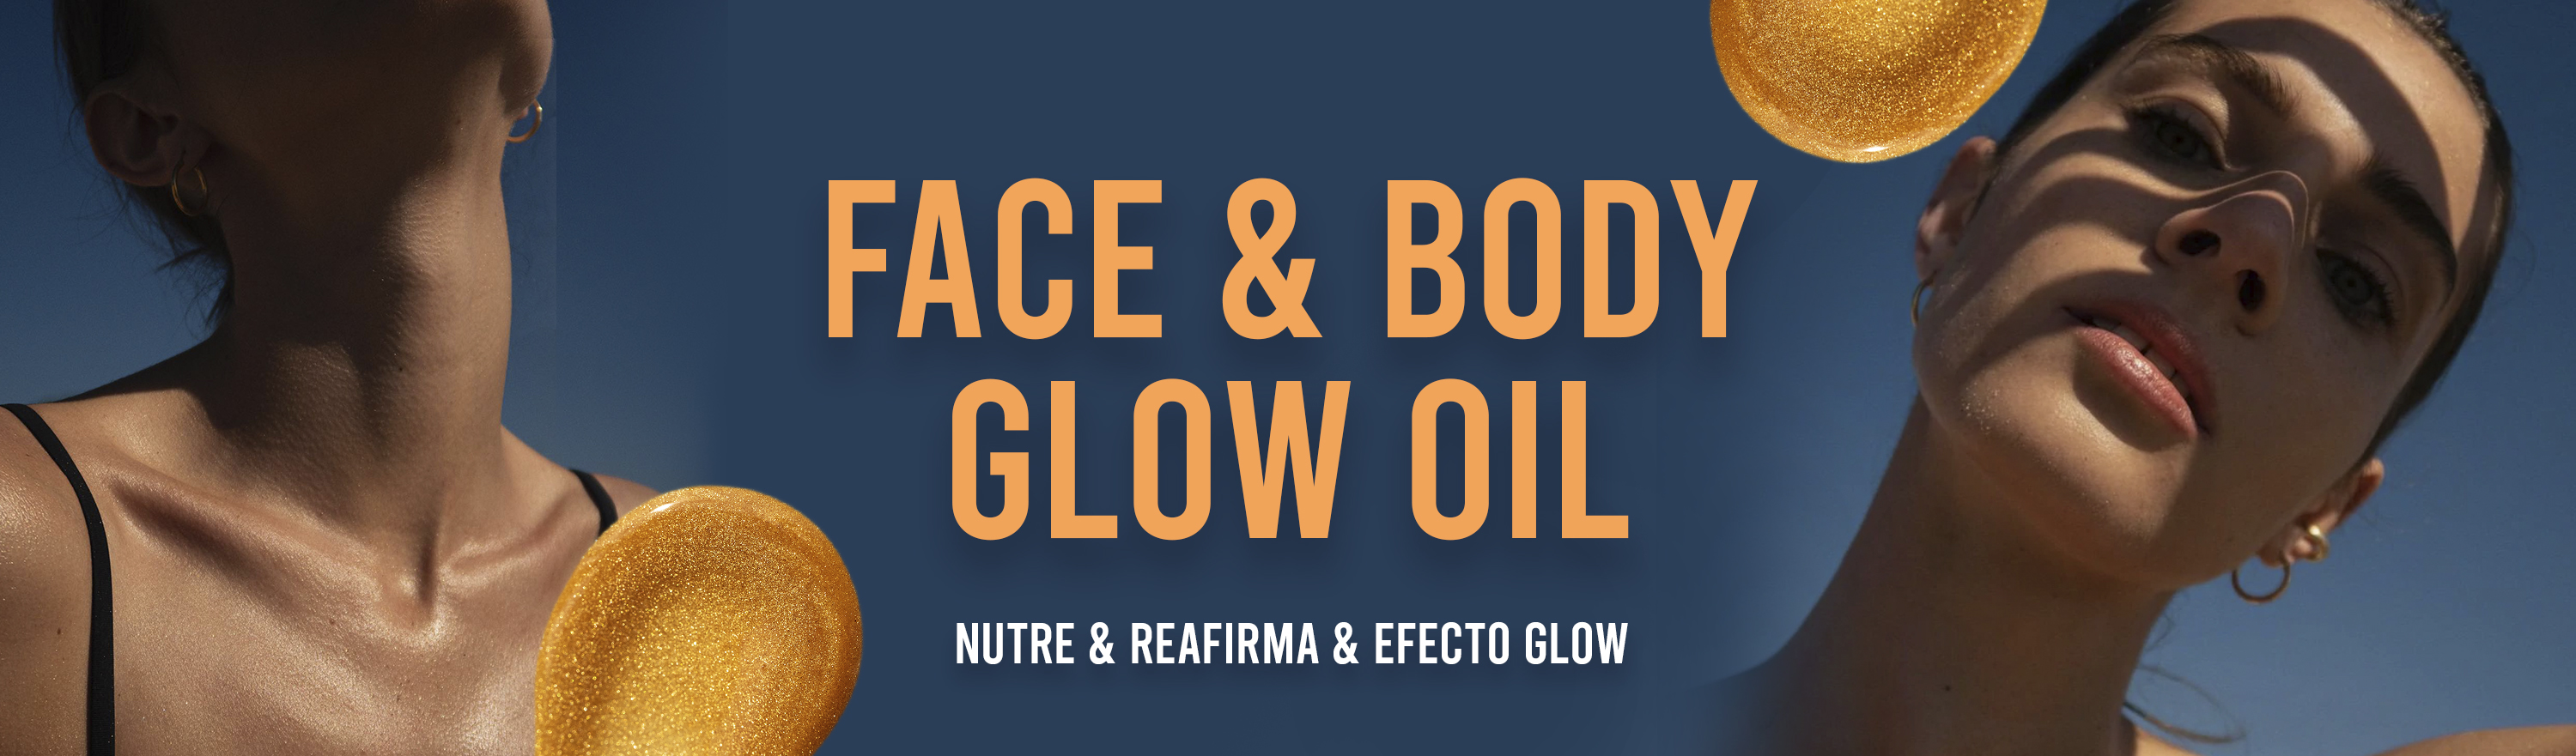 Aceite Corporal Glow oil 